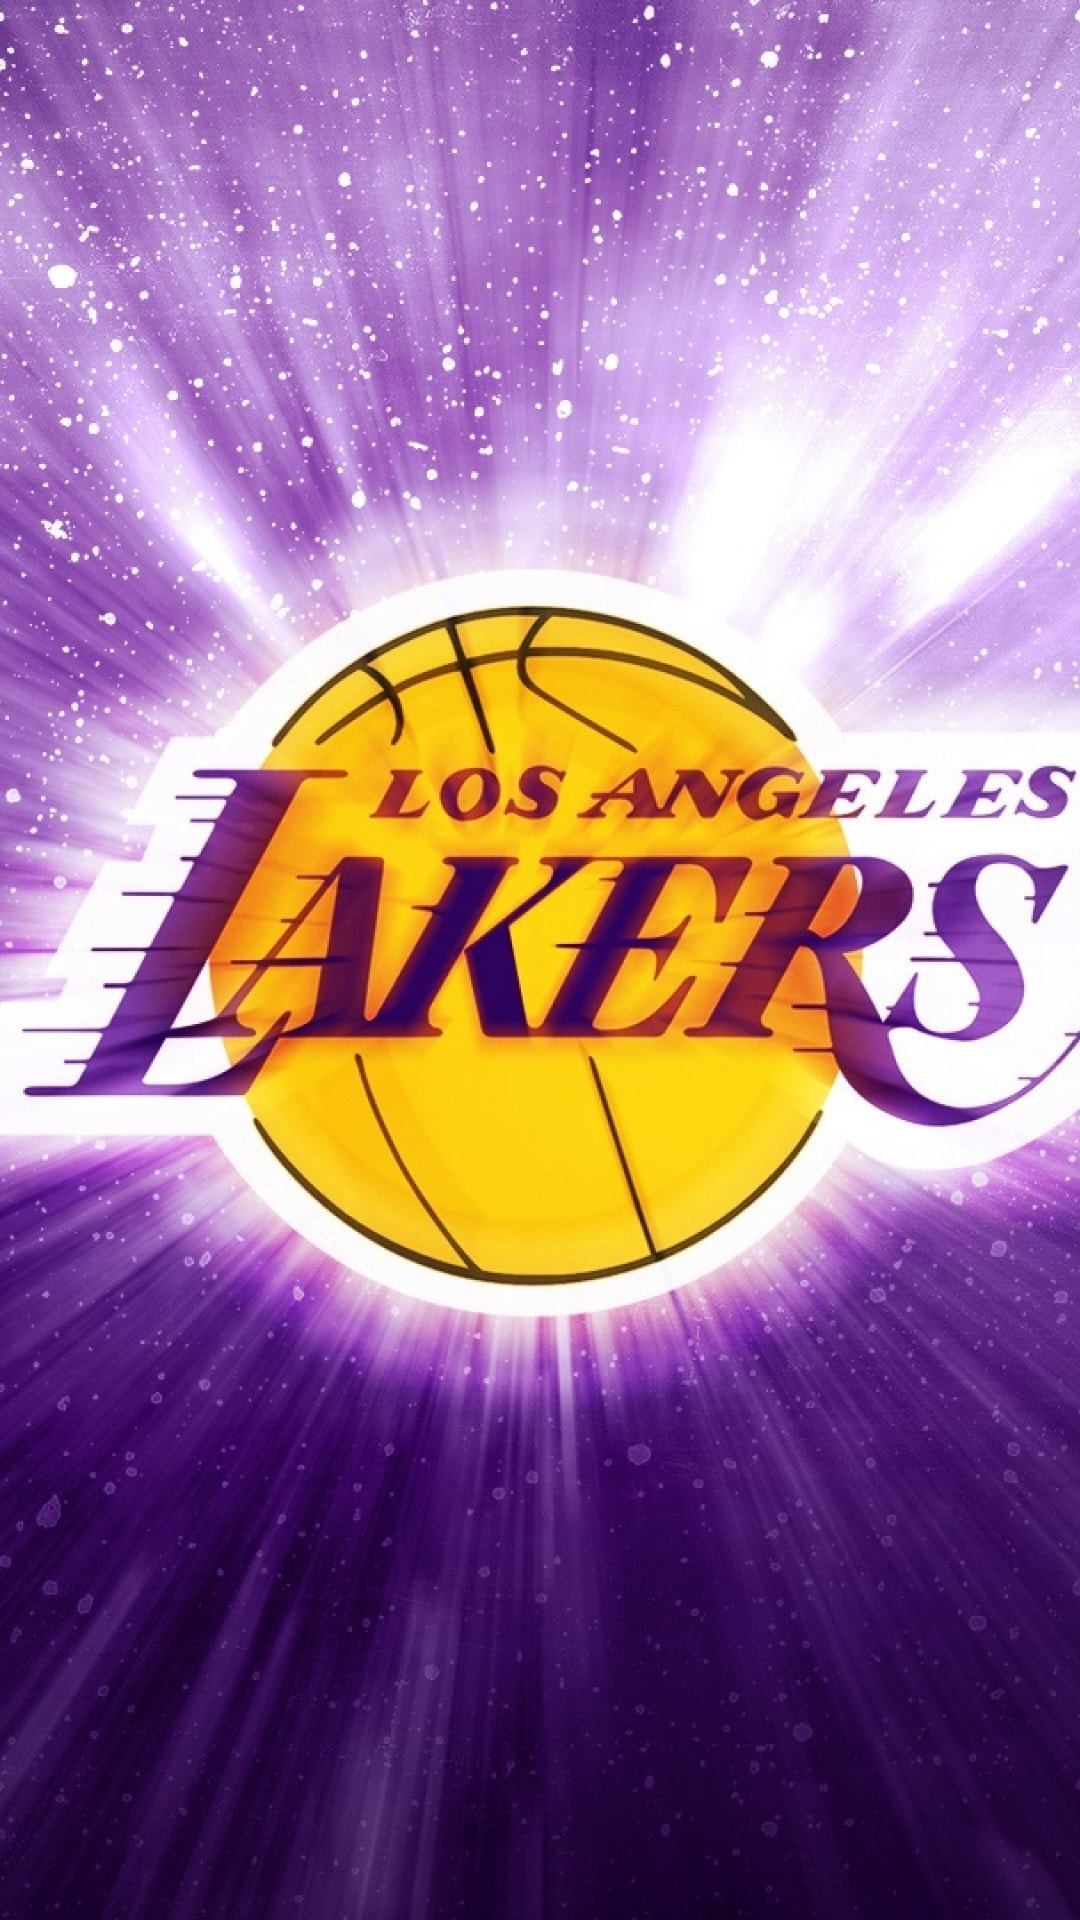 Los Angeles Lakers Backgrounds - KoLPaPer - Awesome Free ...